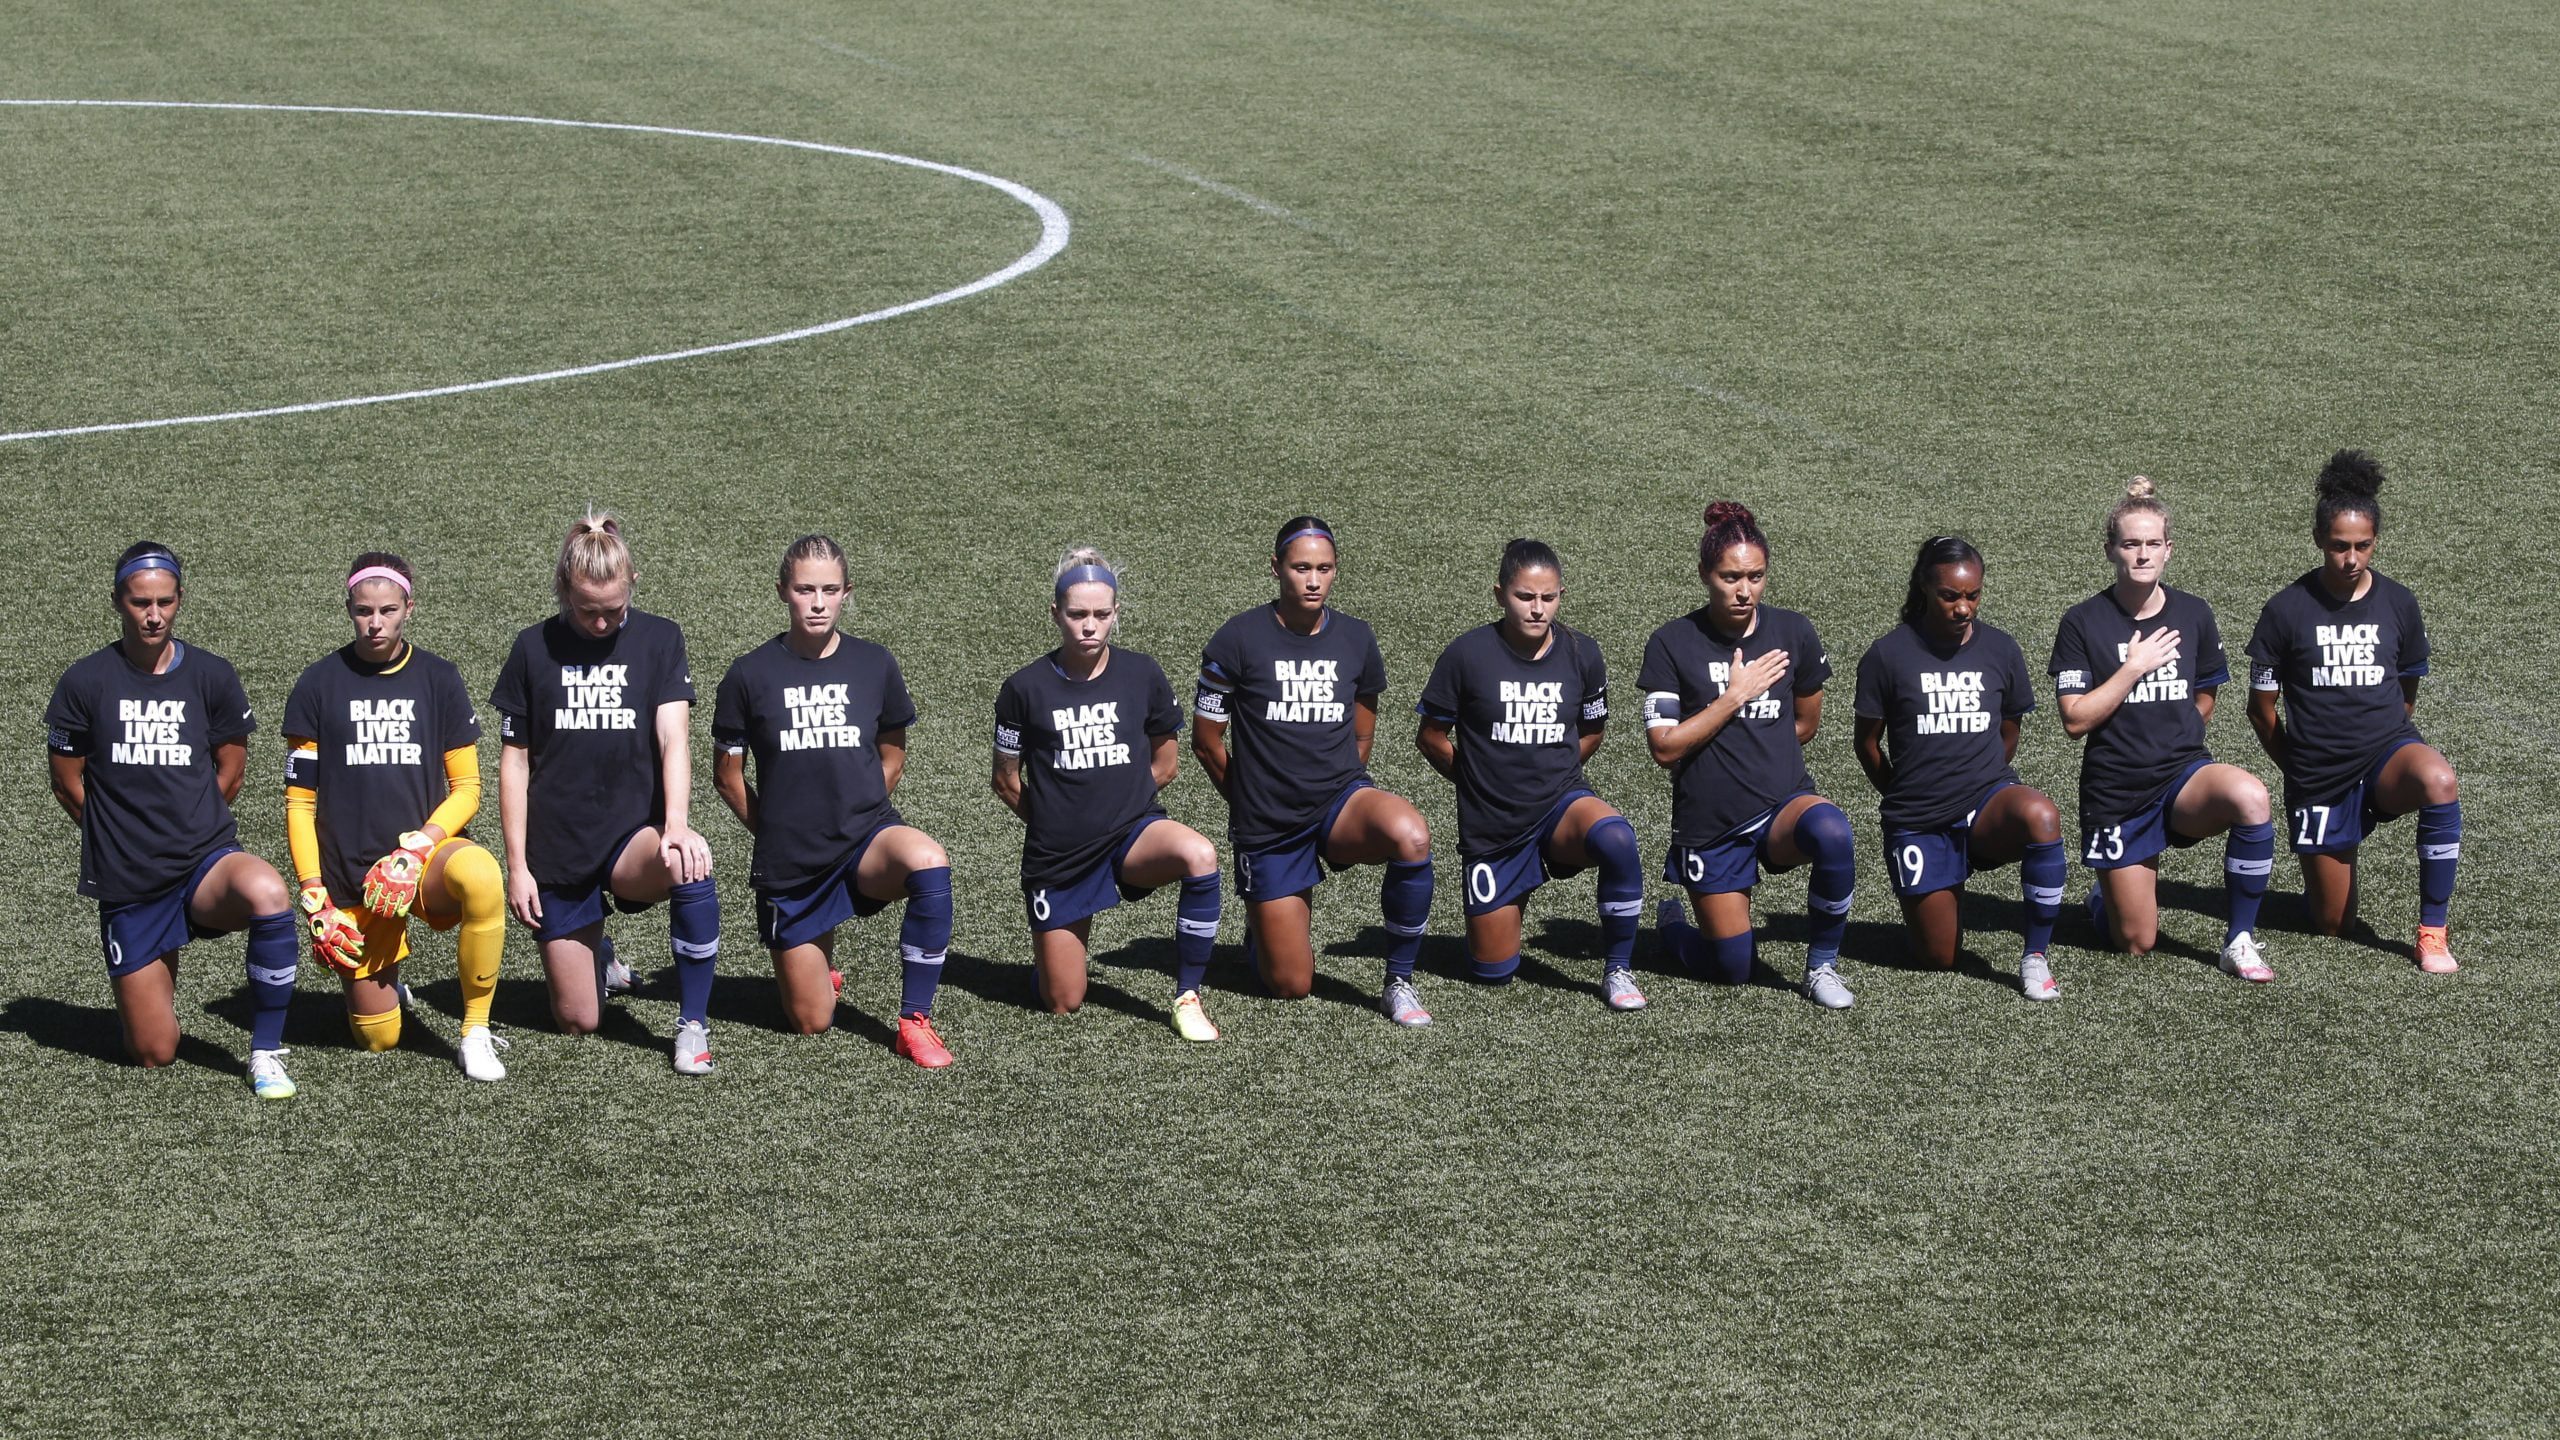 NC Courage players, opponents kneel during national anthem The North